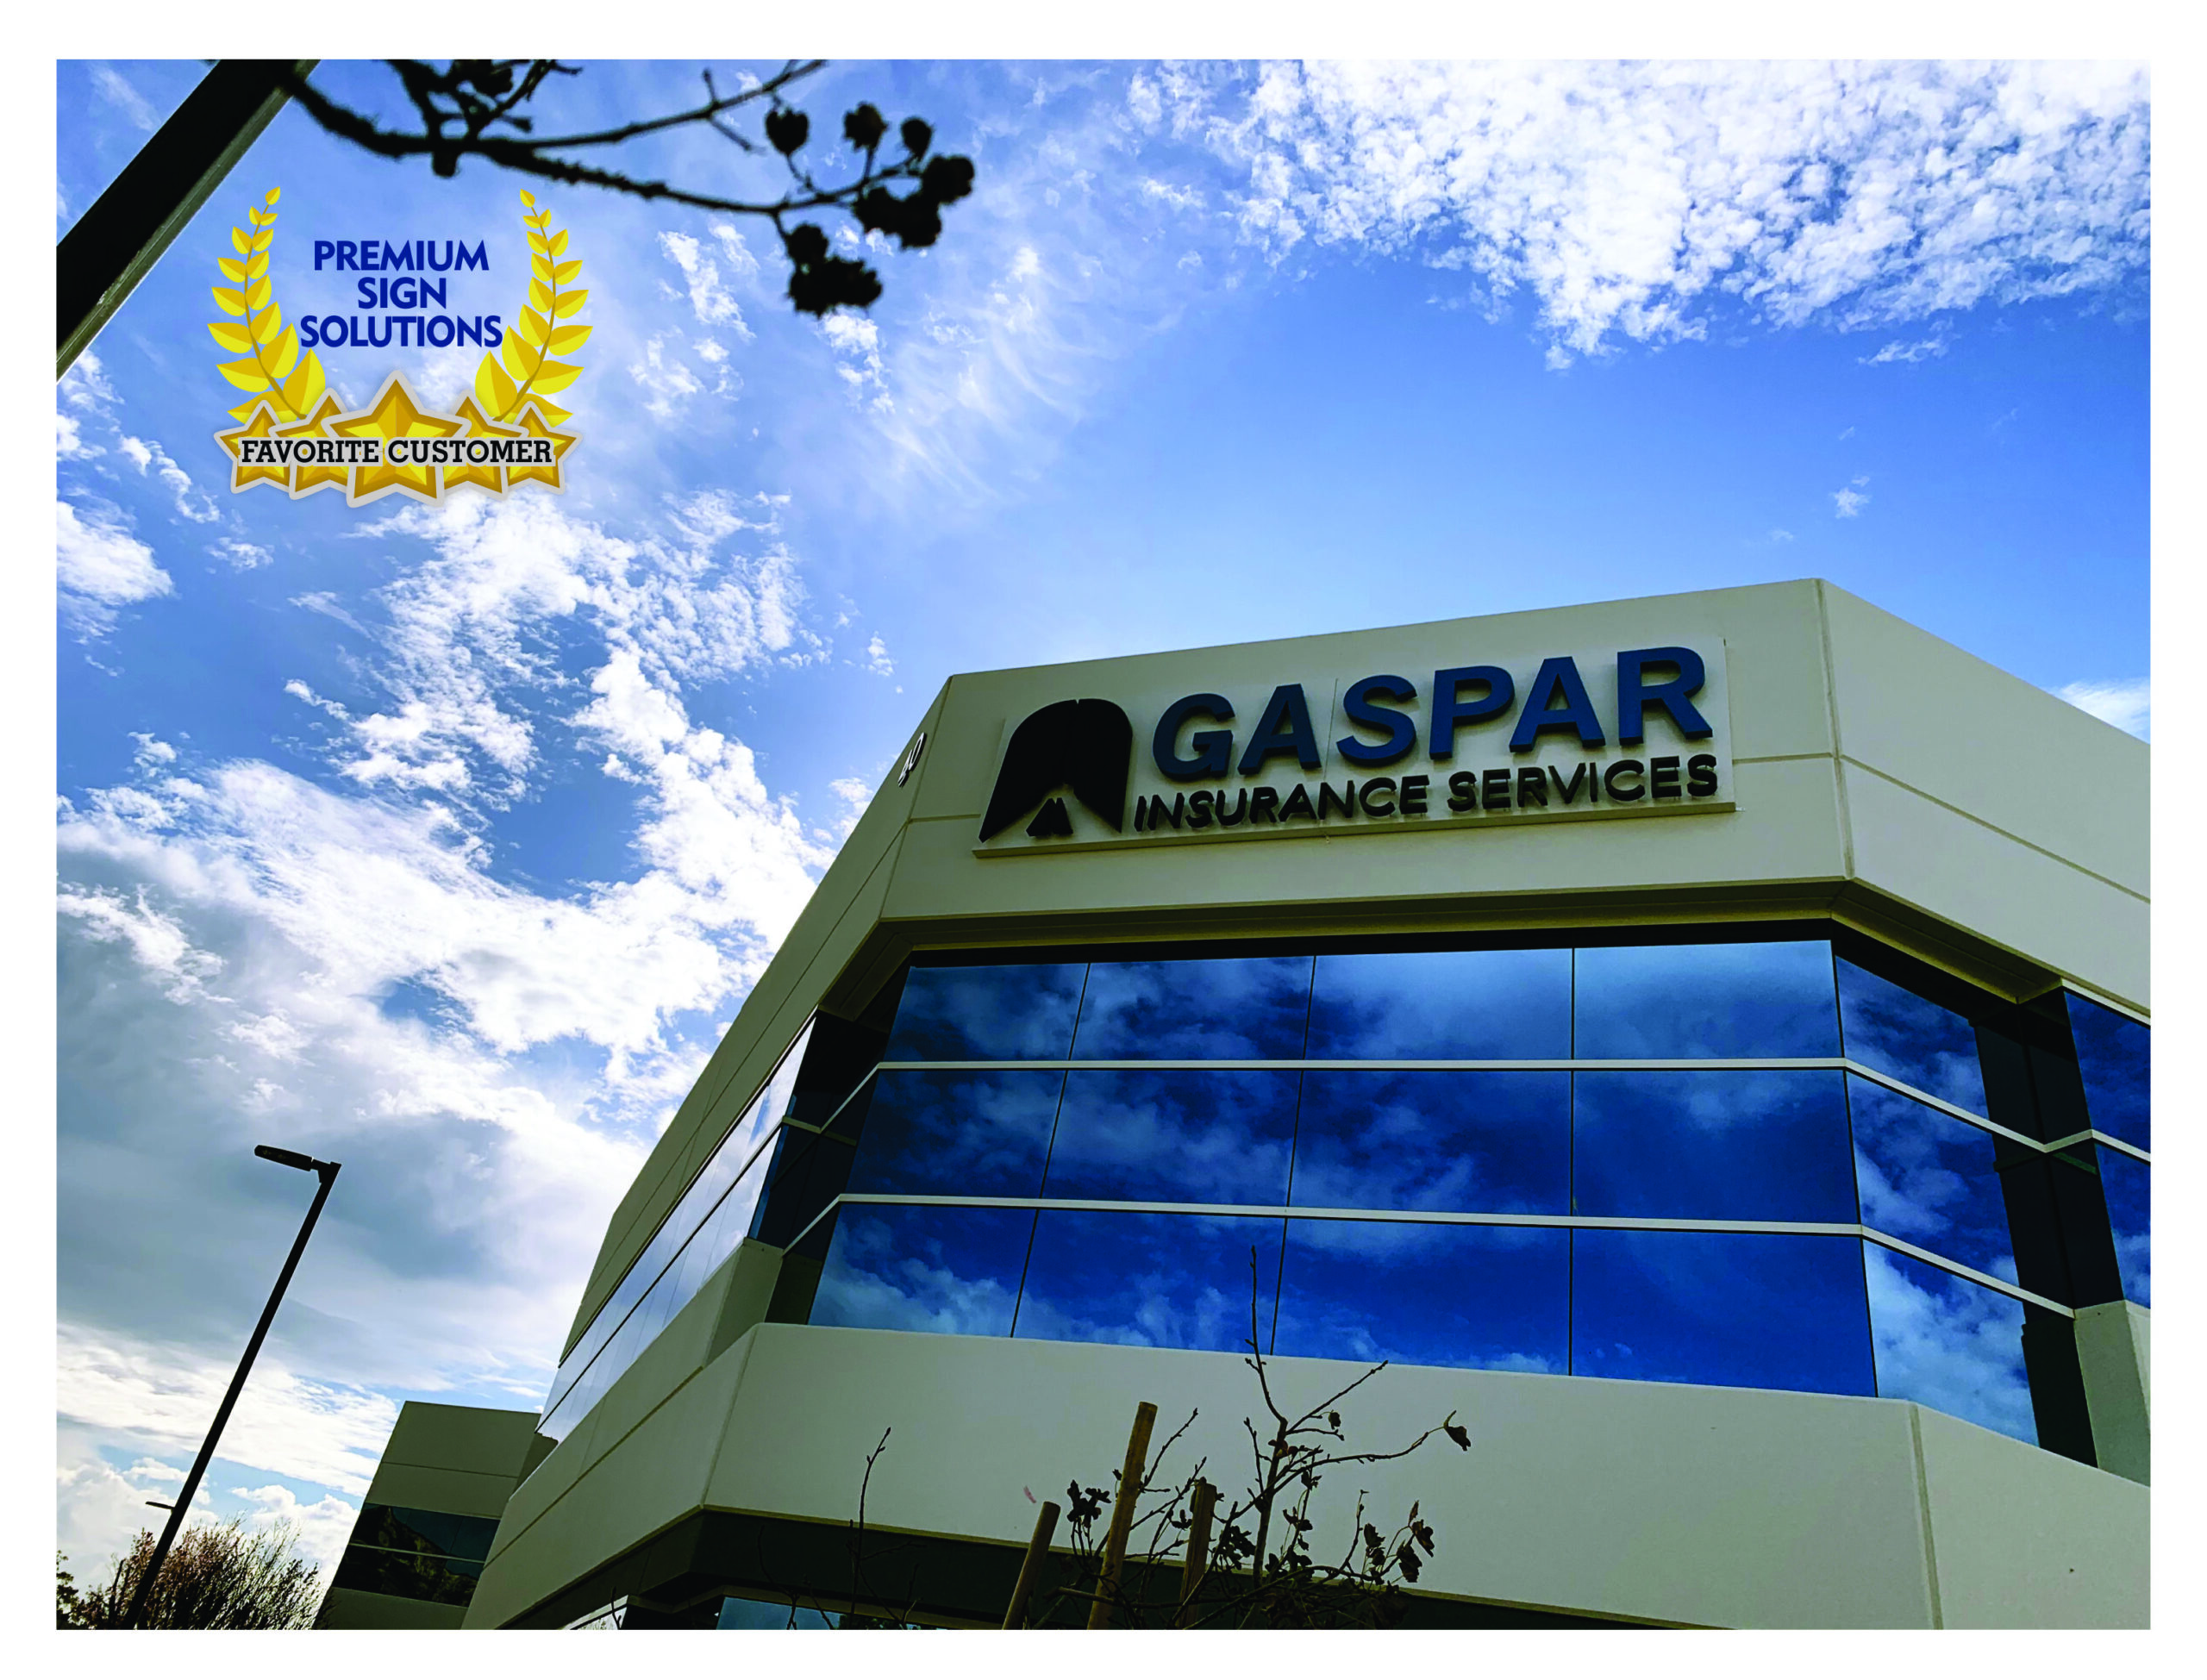 You are currently viewing Honoring Our Favorite Customers – Gaspar Insurance Services in Simi Valley